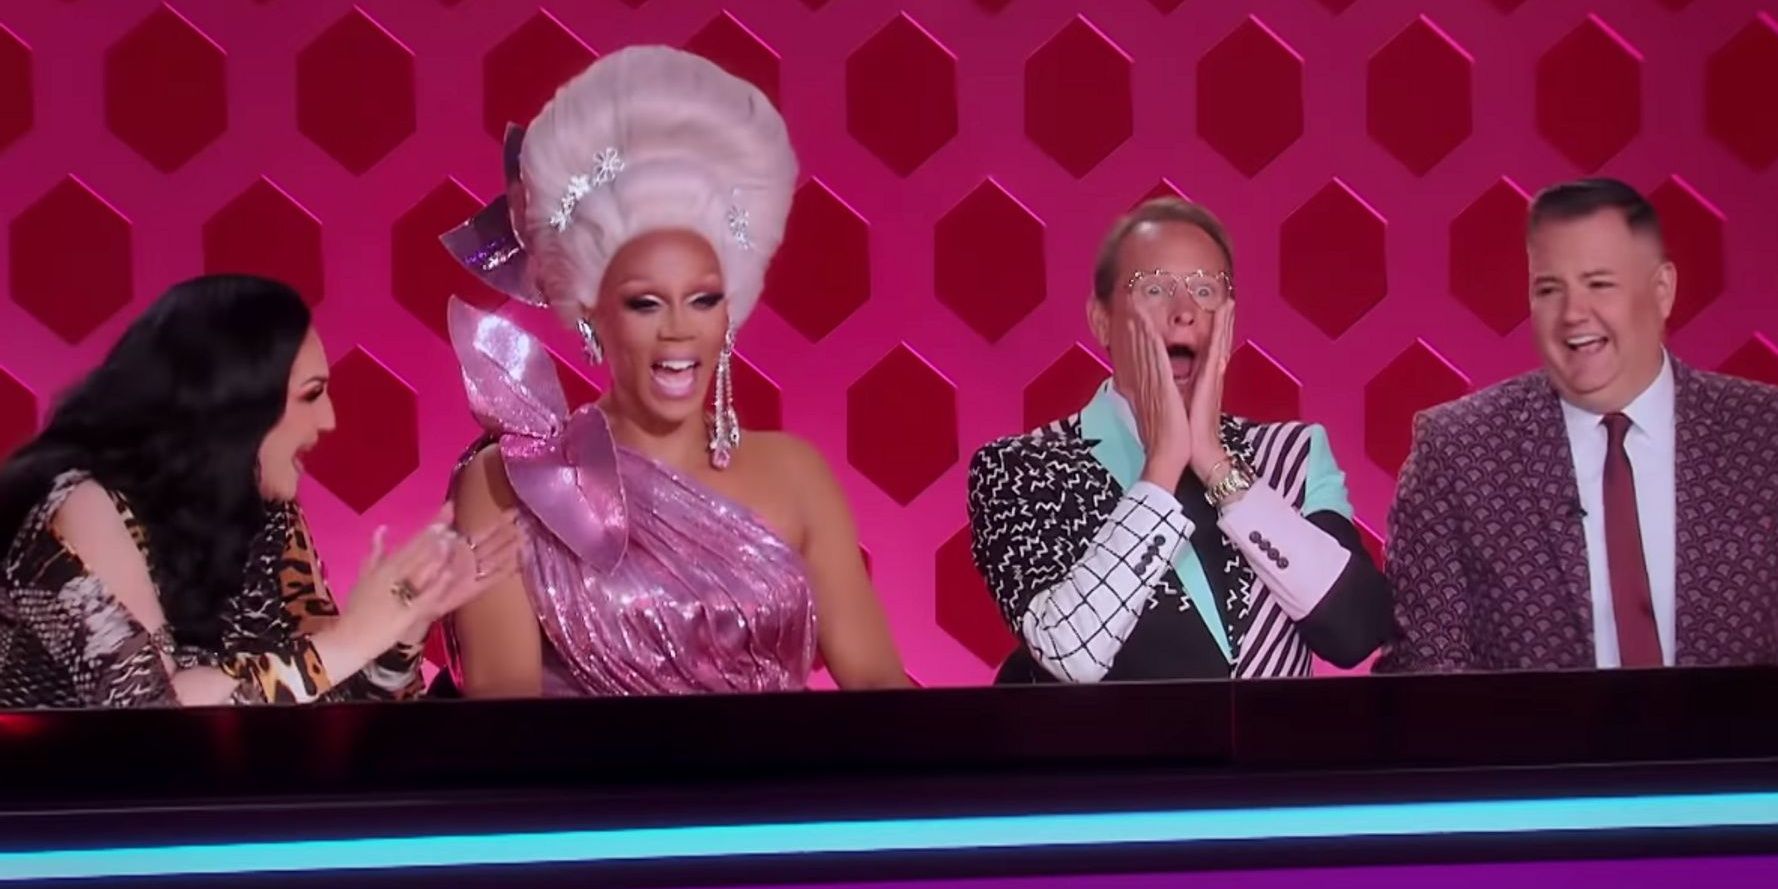 The Drag Race judges laughing